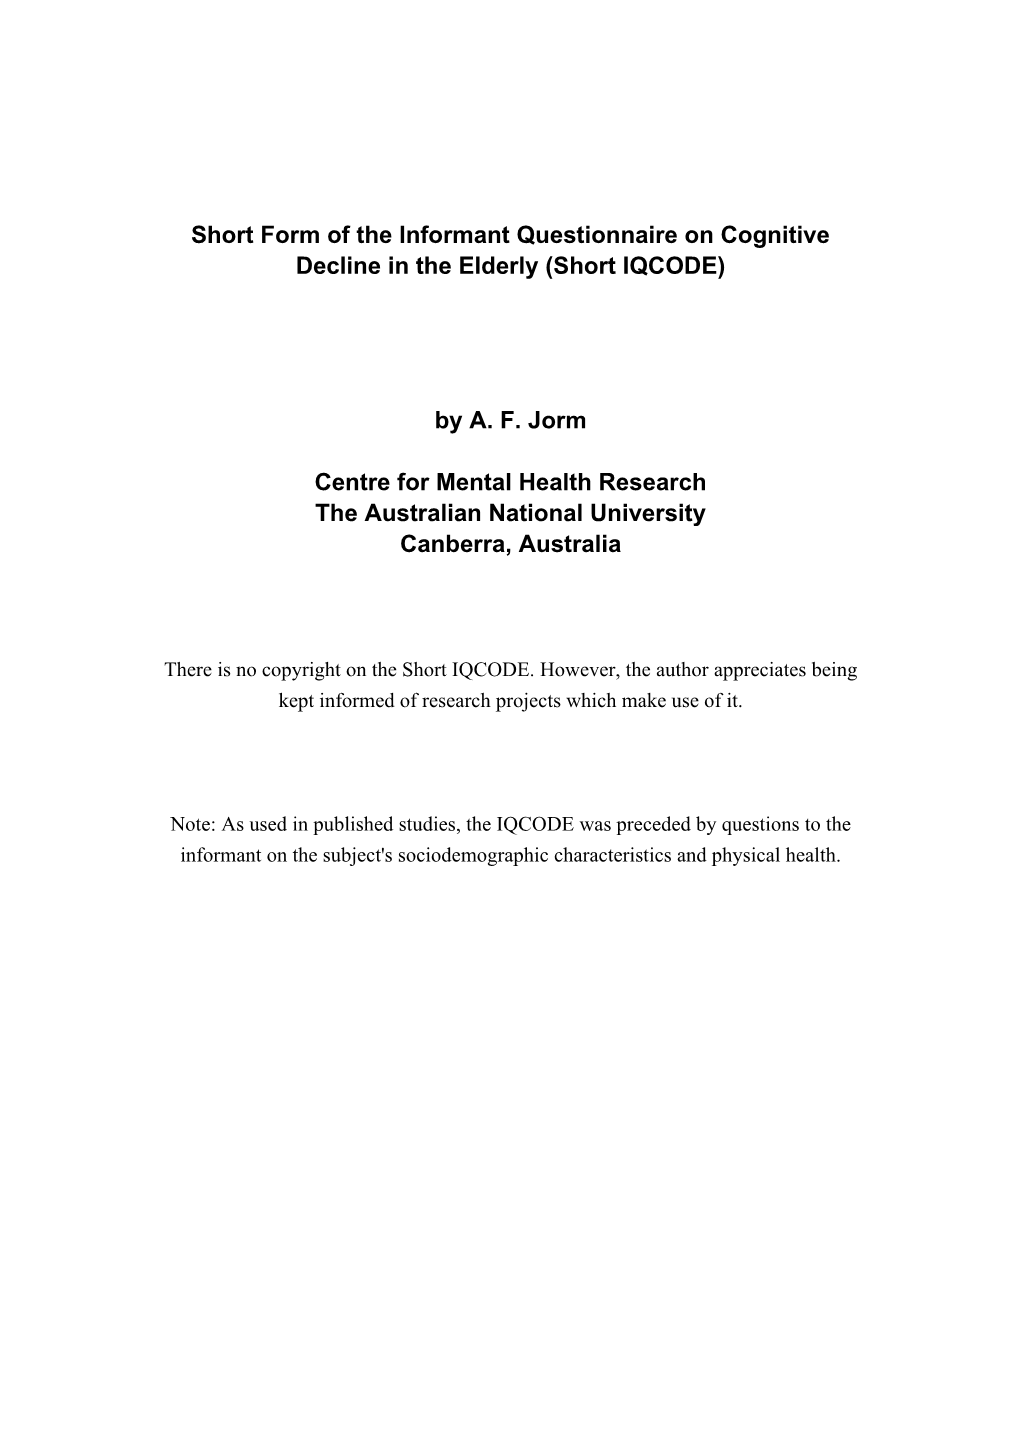 Short Form of the Informant Questionnaire on Cognitive Decline in the Elderly (Short IQCODE)